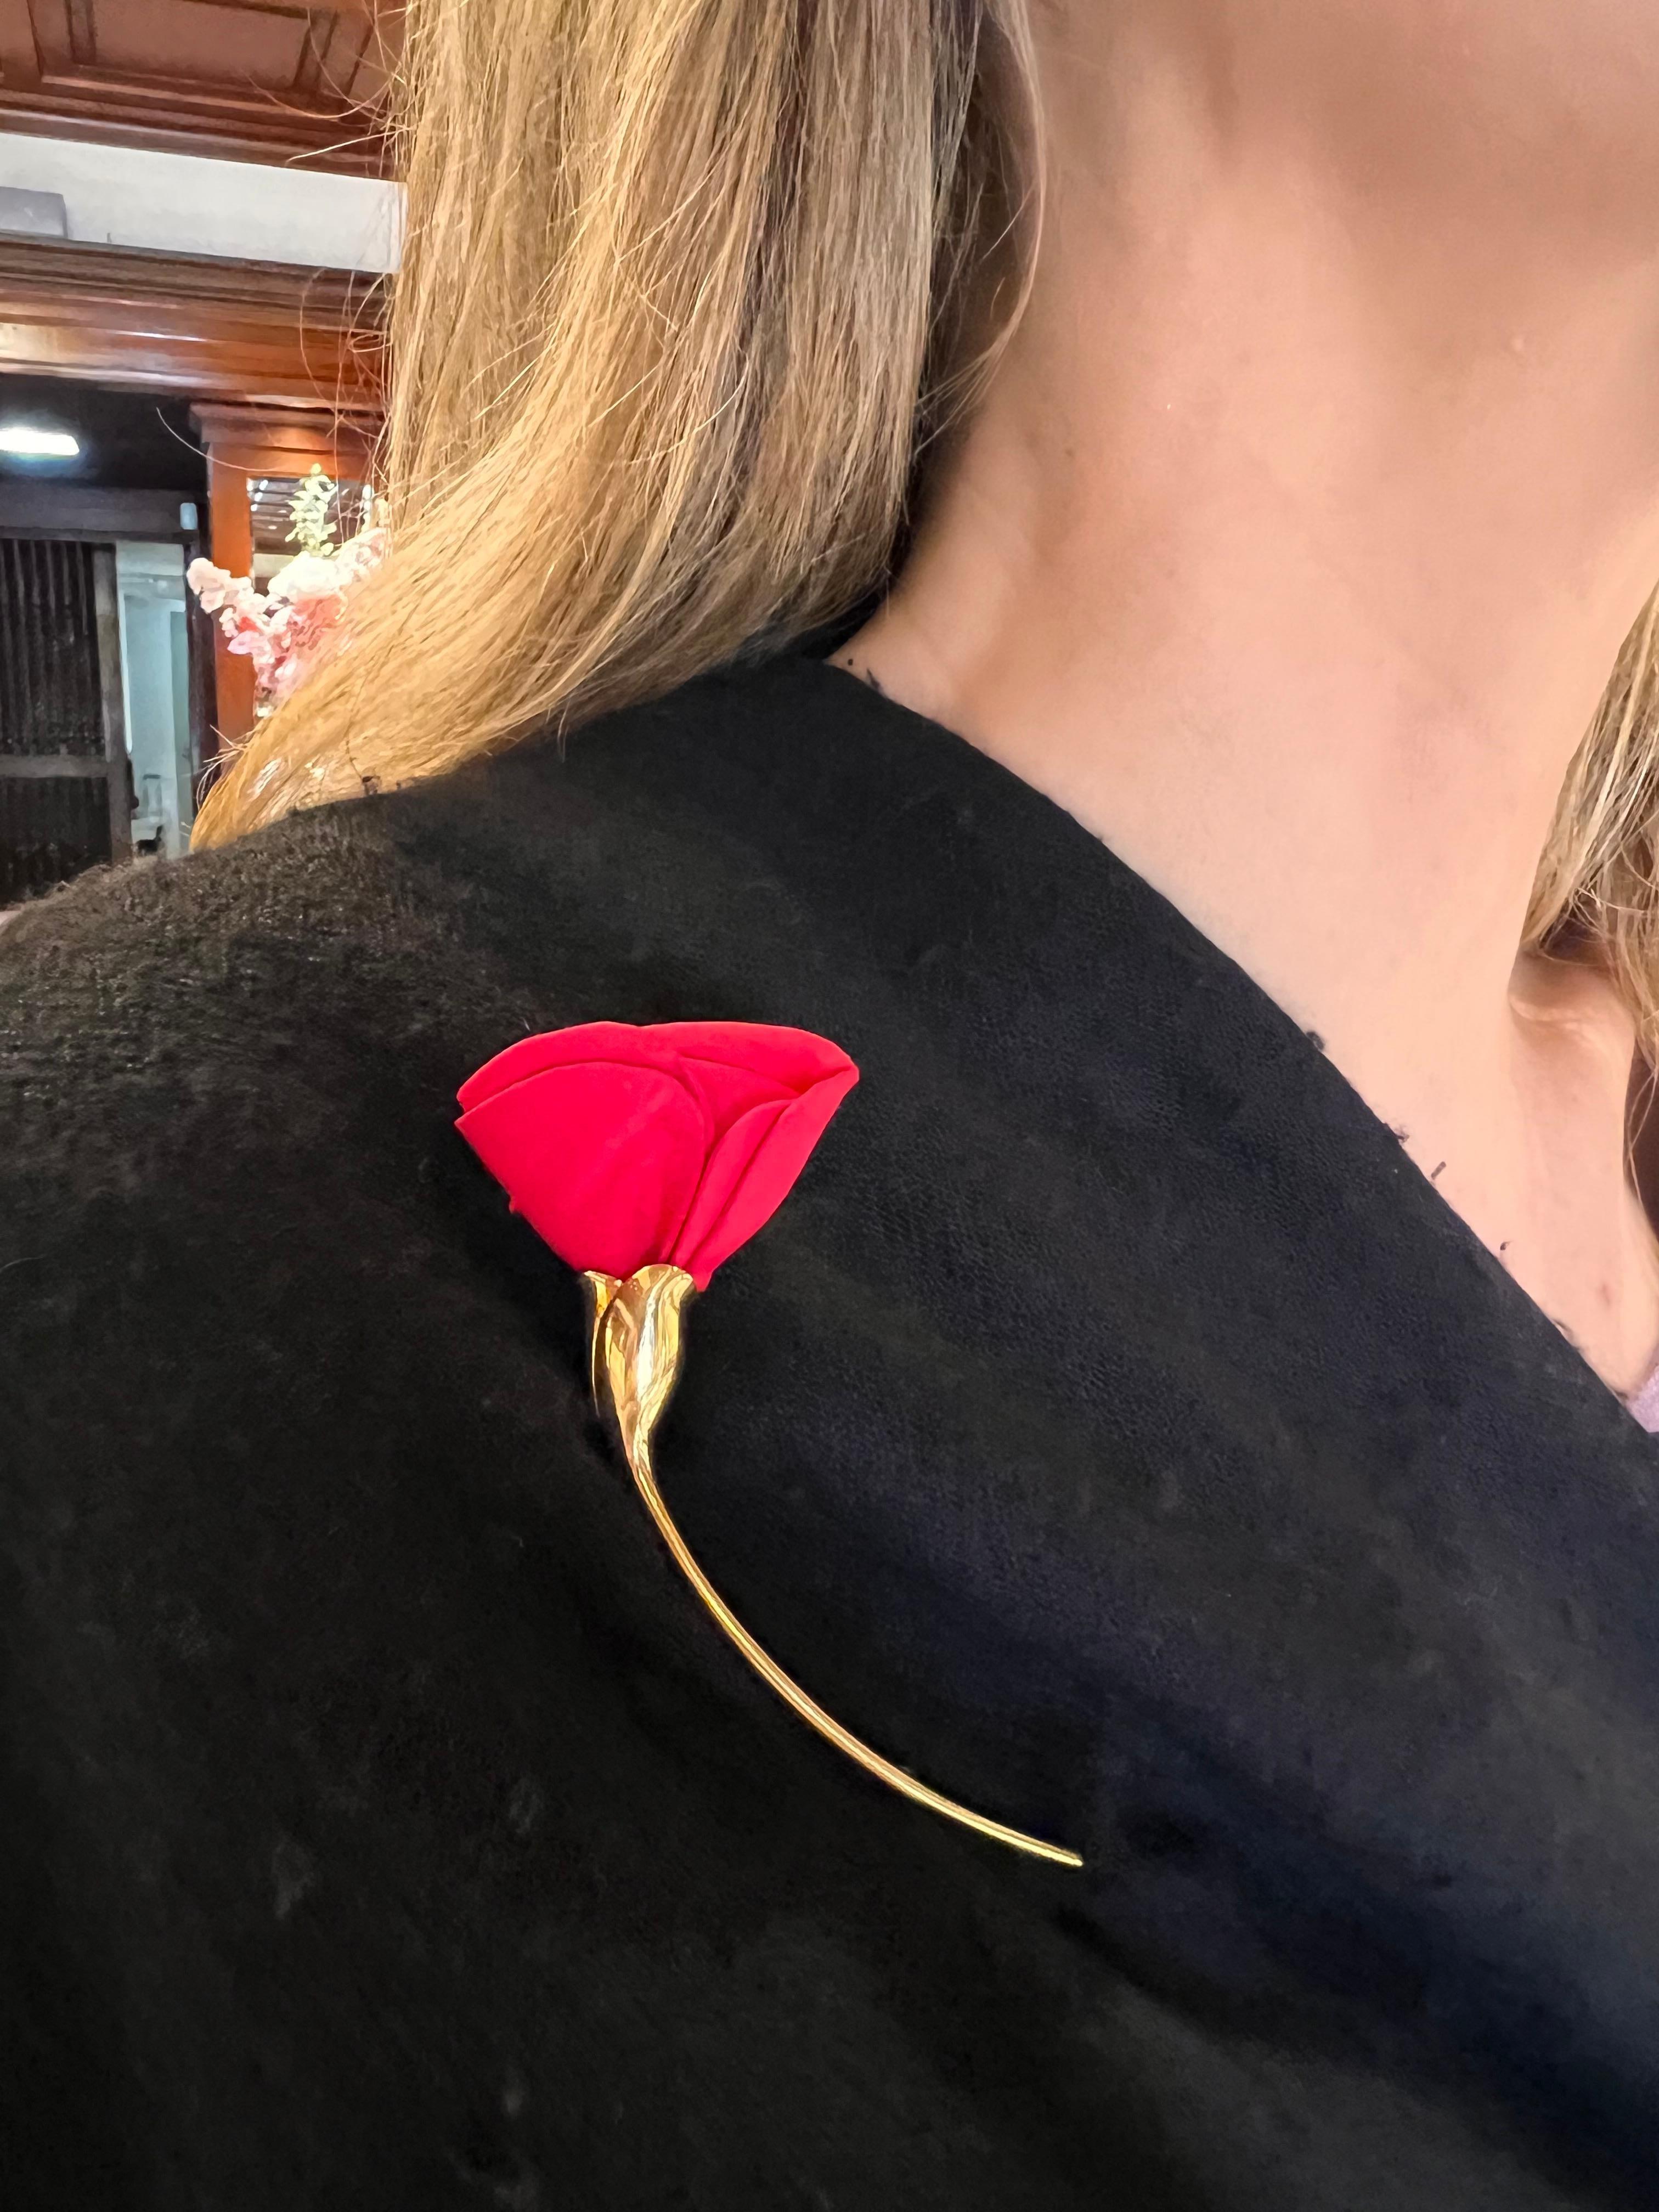 Beautiful 'Amapola' poppy flower brooch by renowned designer 'Elsa Peretti' for Tiffany & Co.  The petals are created out of red silk perched on a polished 18k yellow gold stem.  The pin closure mechanism follows the contour of the elongated stem. 